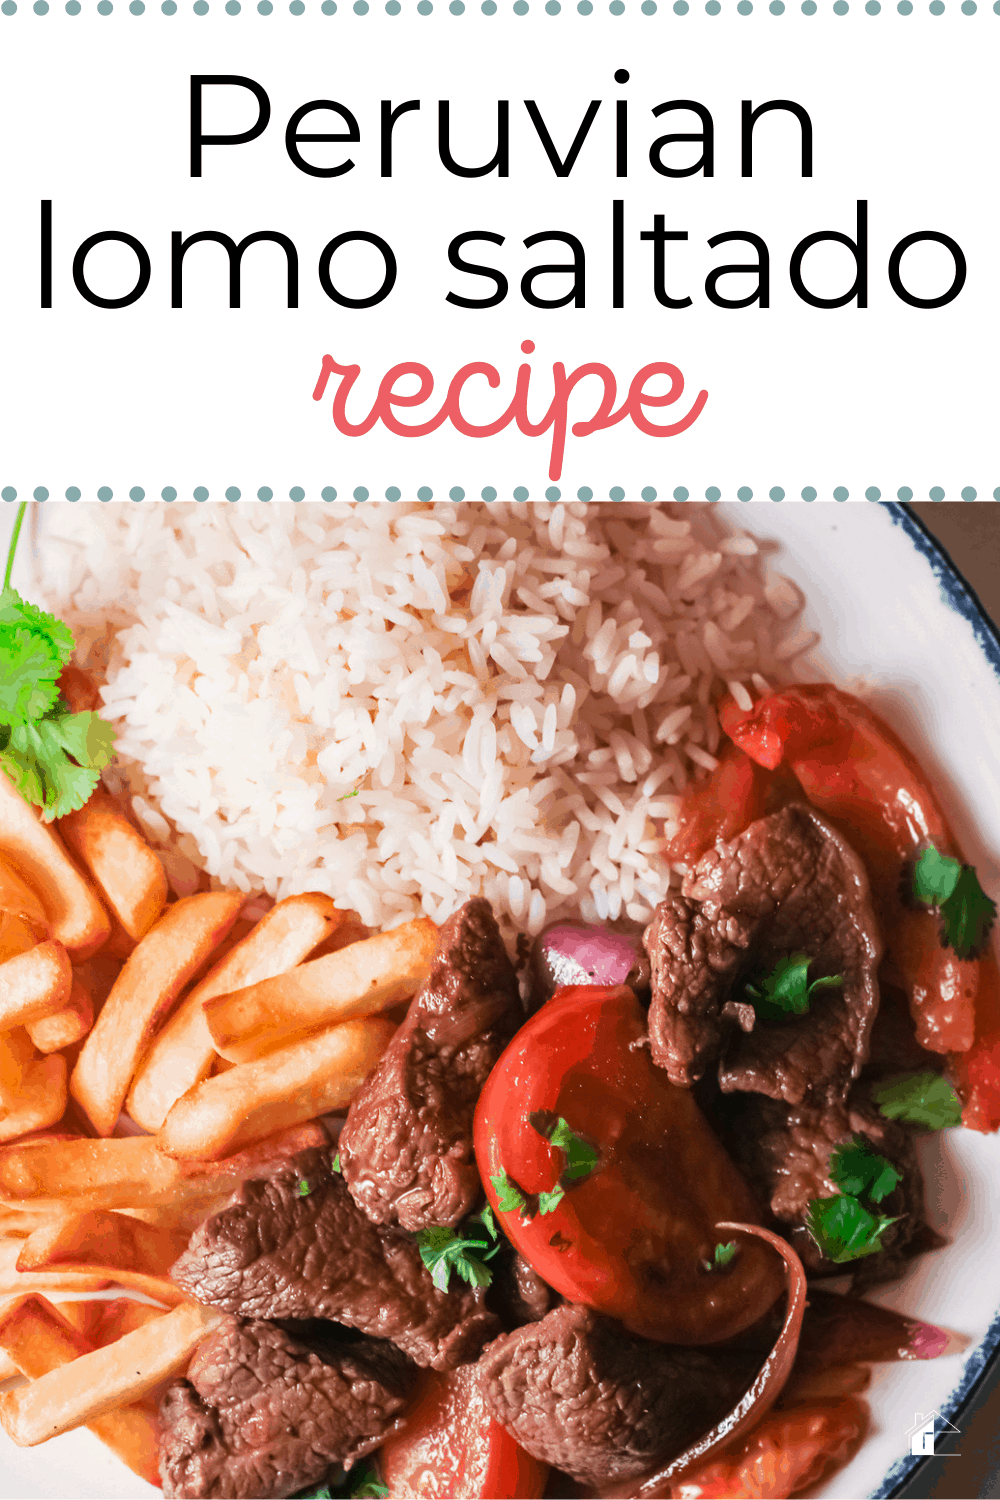 This traditional Peruvian Lomo Saltado is very popular for its Chinese touch. Its savory taste will give you an enjoyable meal for lunch or dinner. via @mystayathome